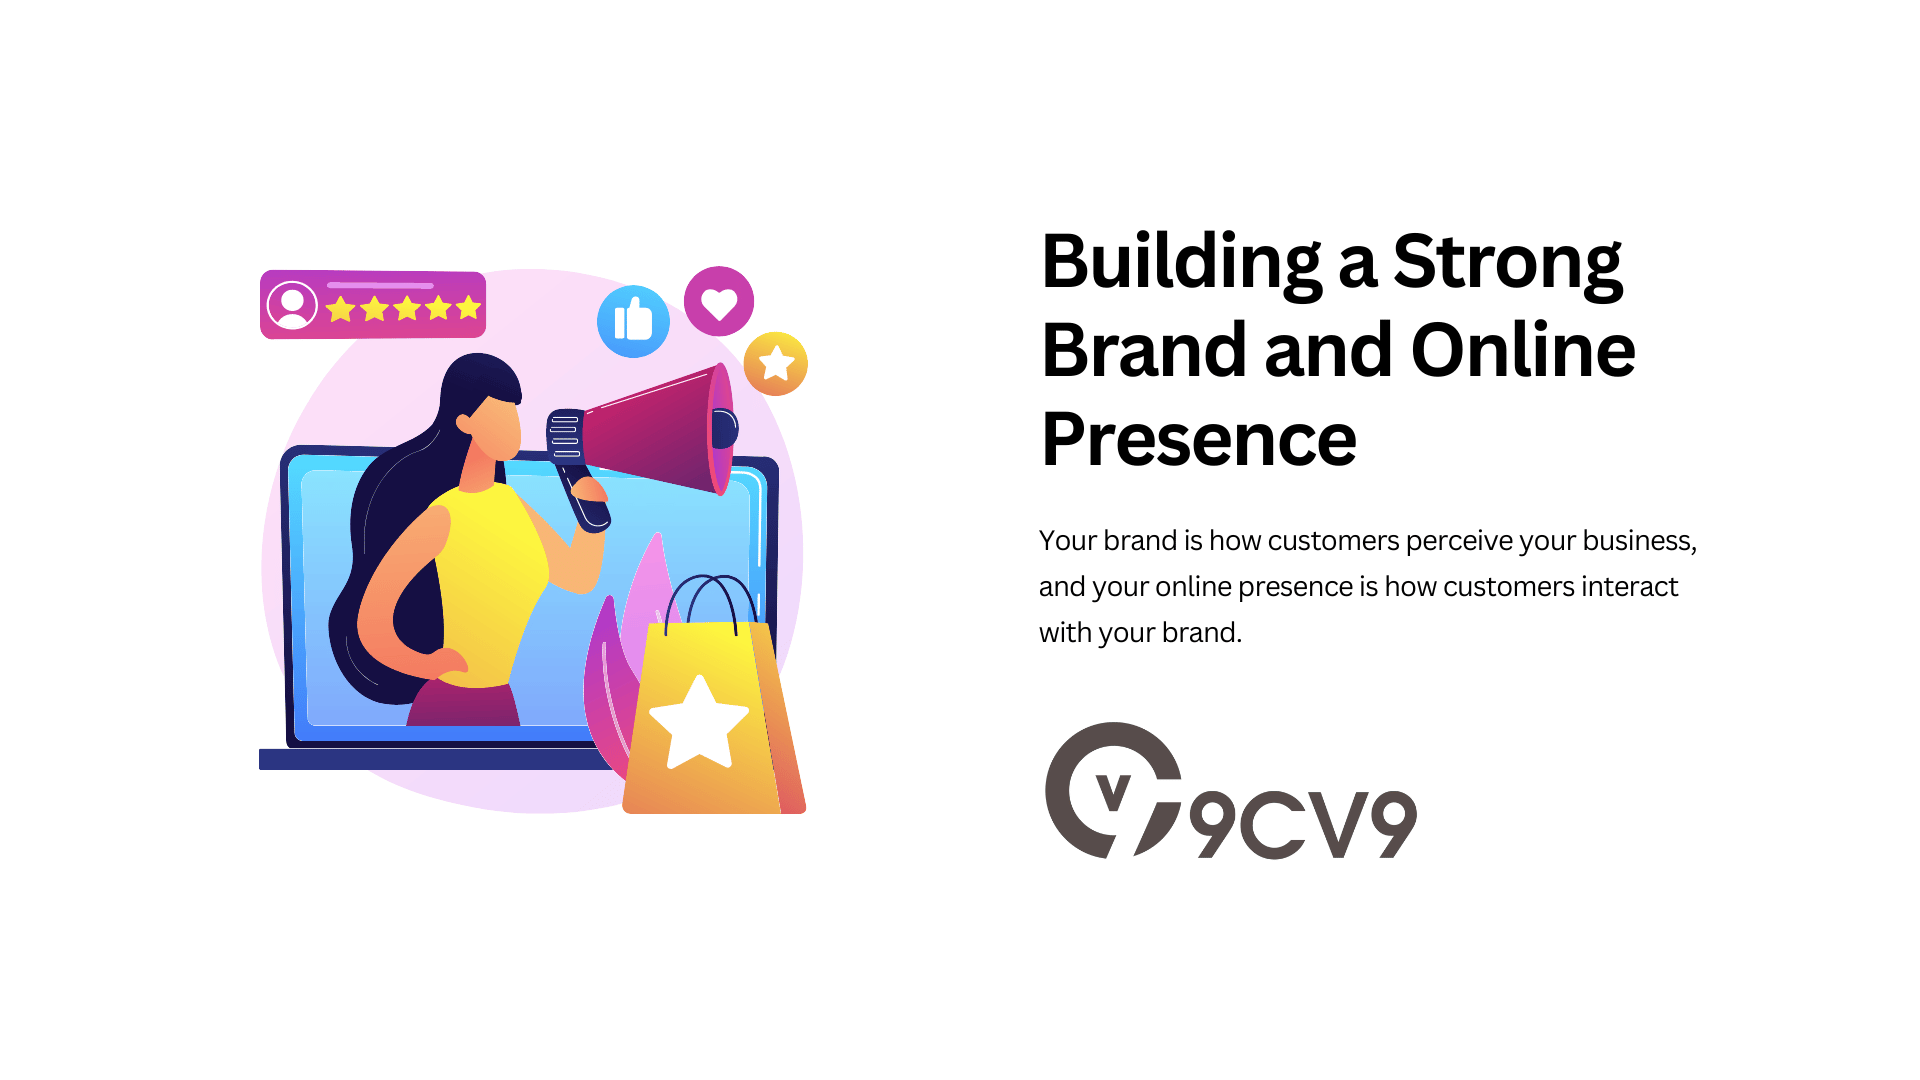 Building a Strong Brand and Online Presence